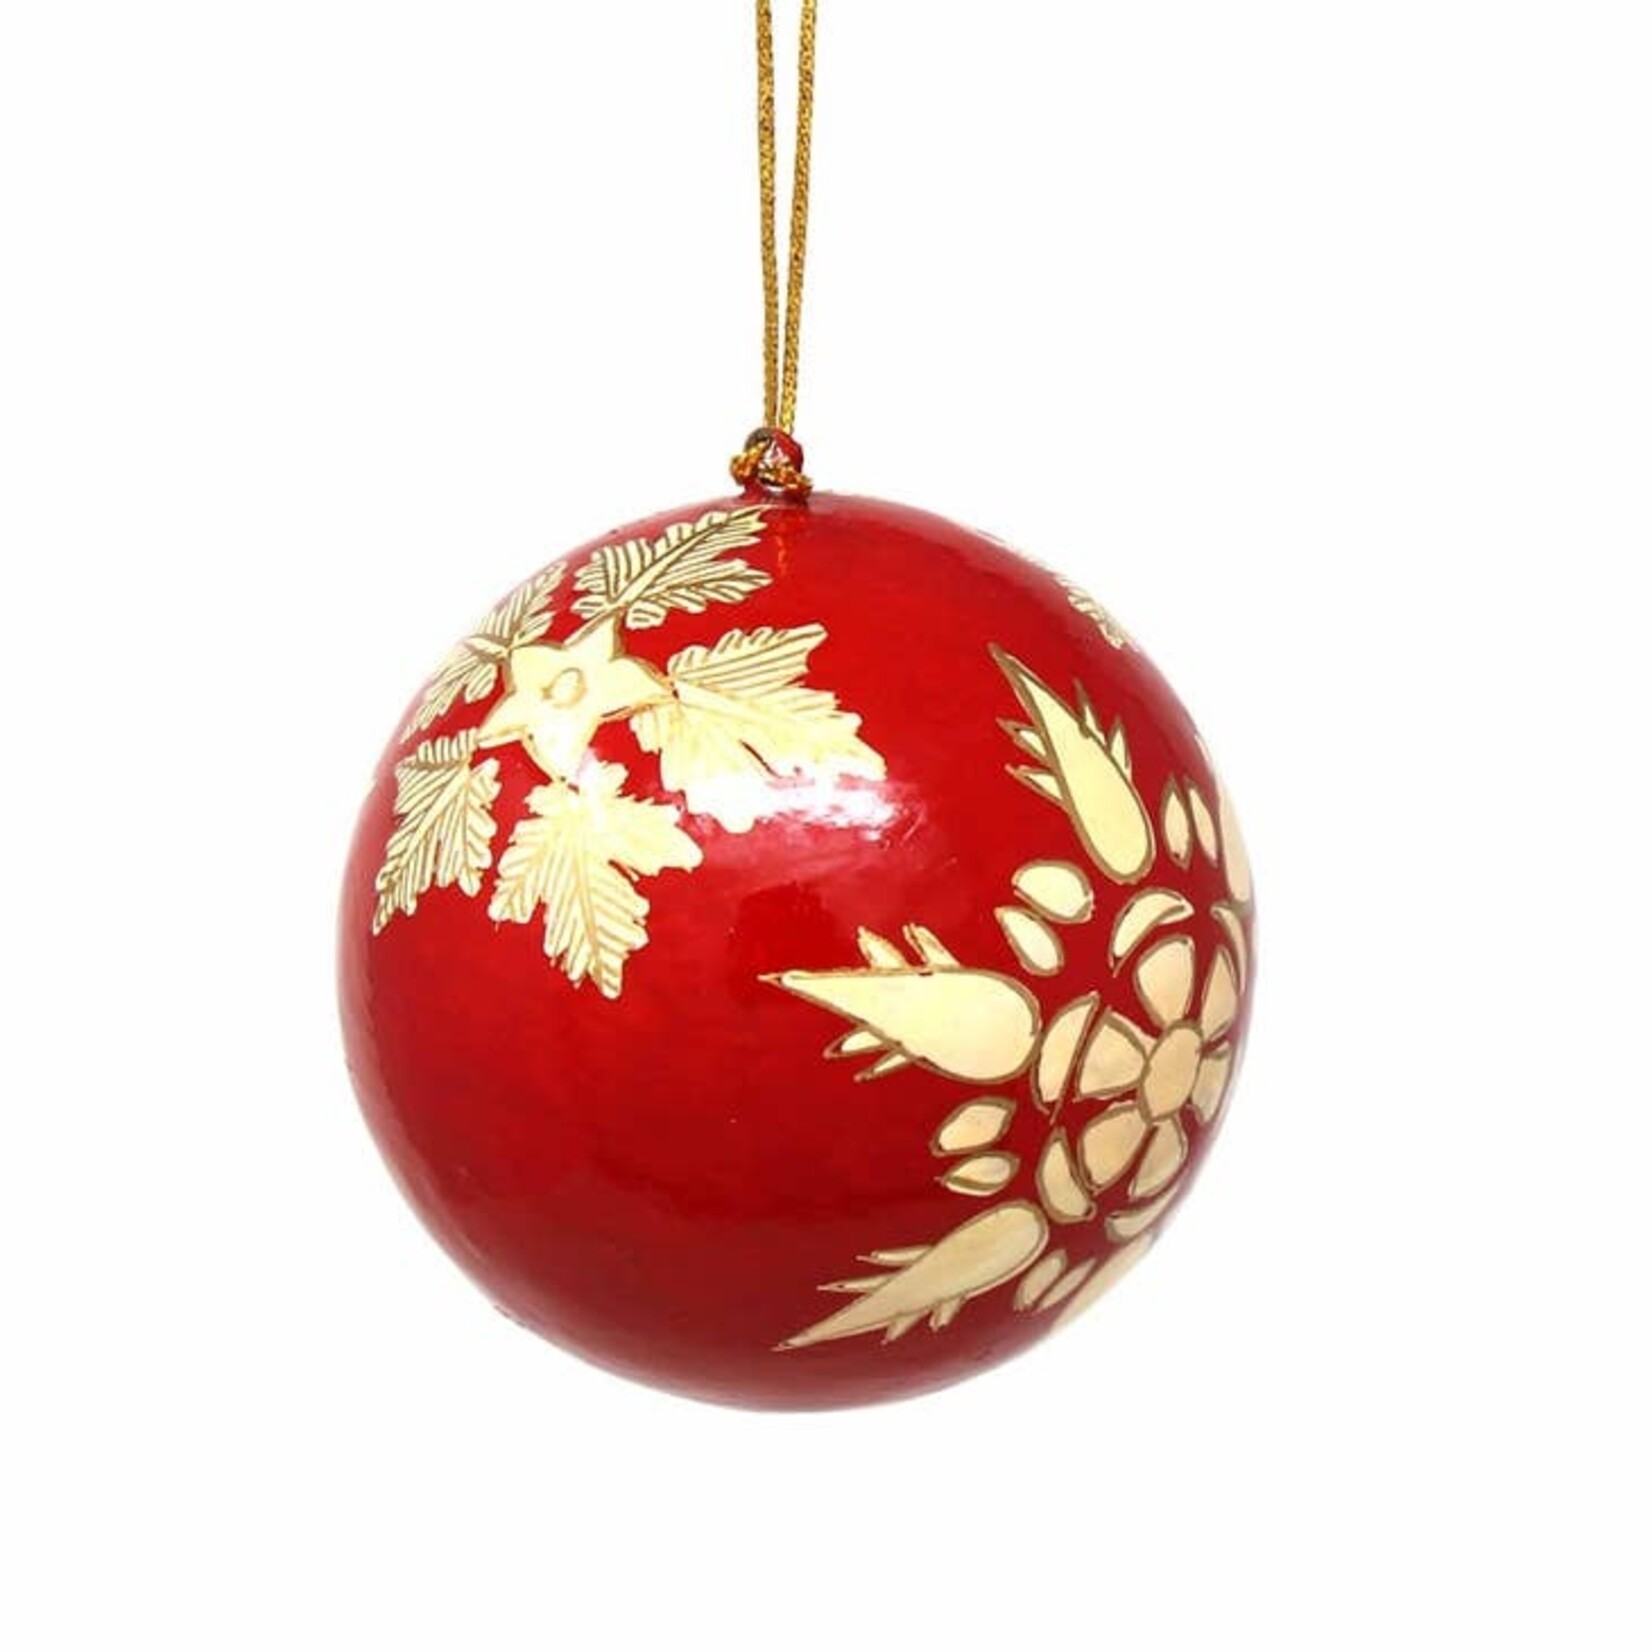 Global Crafts Handpainted Ball Ornament Gold Snowflakes, India